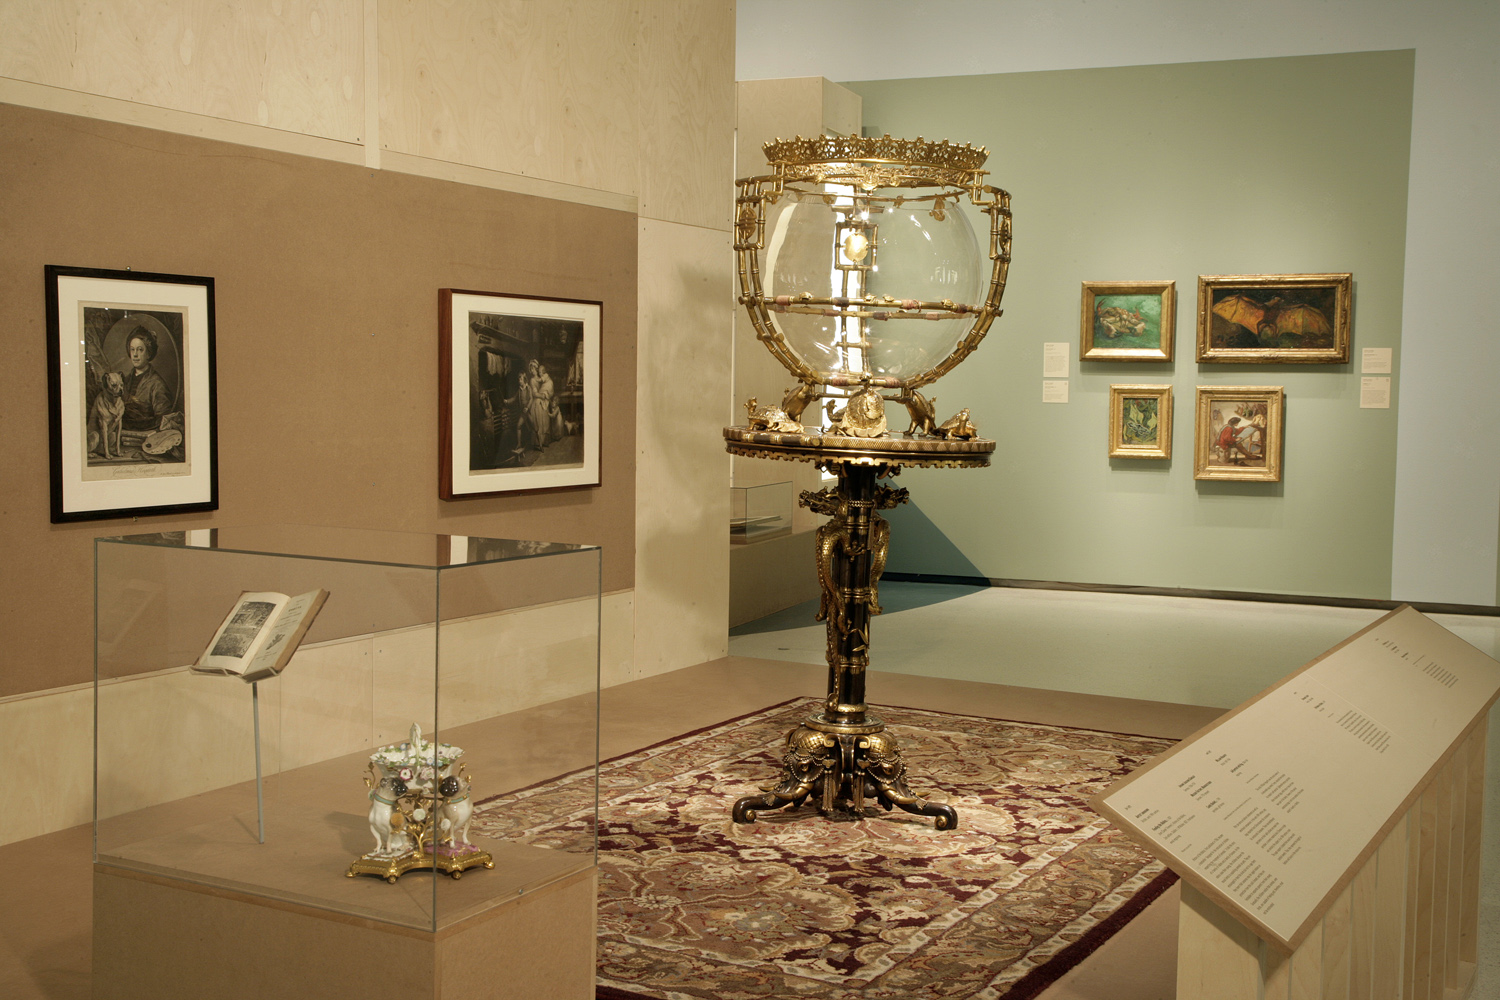 Installation view of Fierce Friends Artists and Animals, 1750-1900